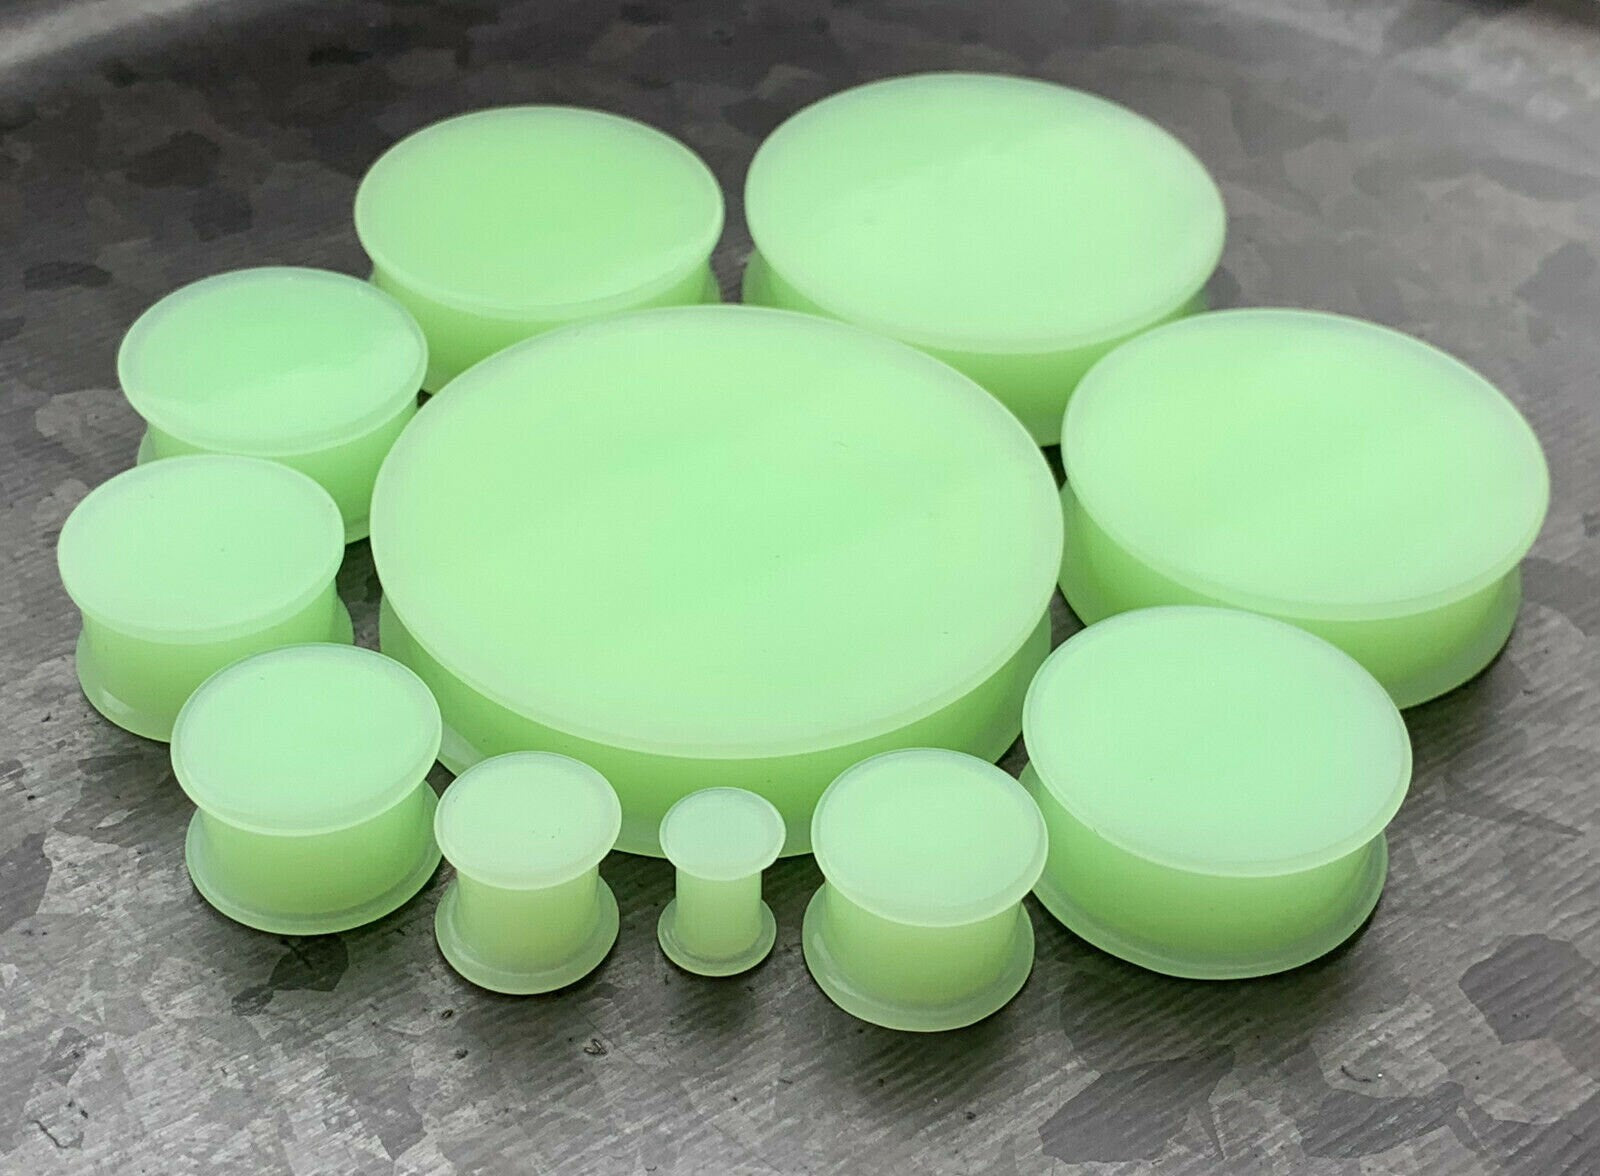 PAIR of Stunning Glow in the Dark Solid Silicone Double Flare Plugs - Gauges 2g (6mm) up to 2" (51mm) available!